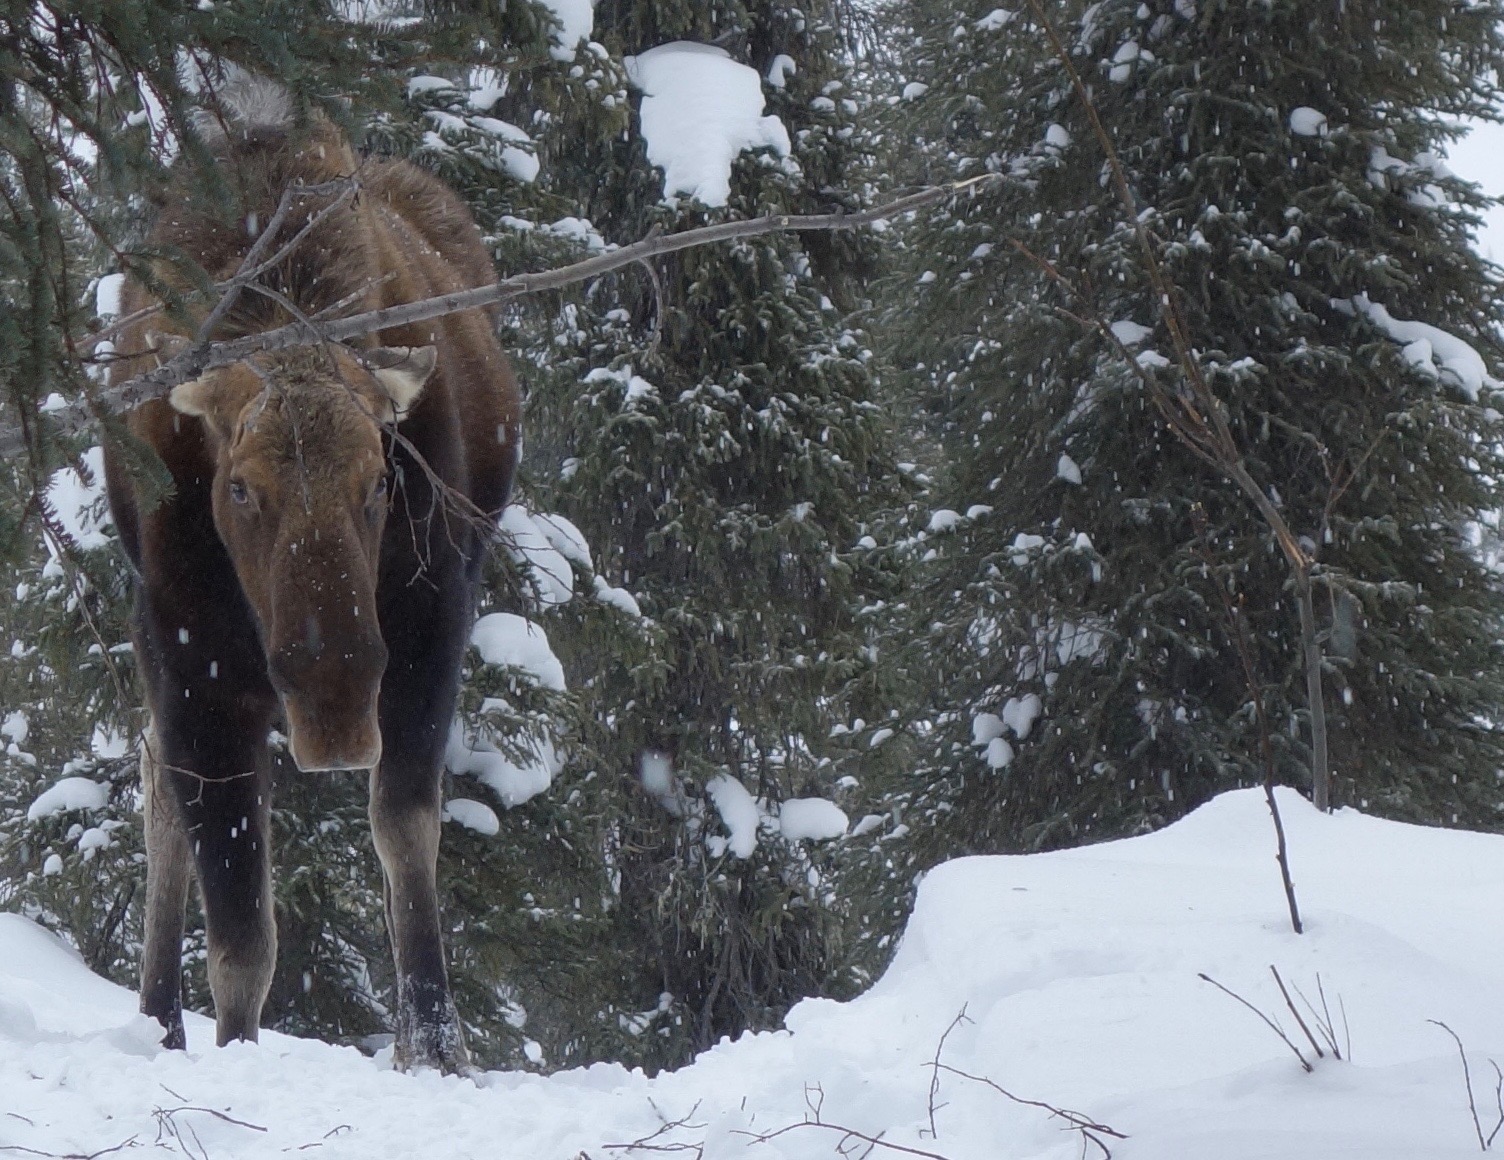 A cow moose lowers its head and holds back its ears while standing on a snowy trail surrounded by spruce trees.